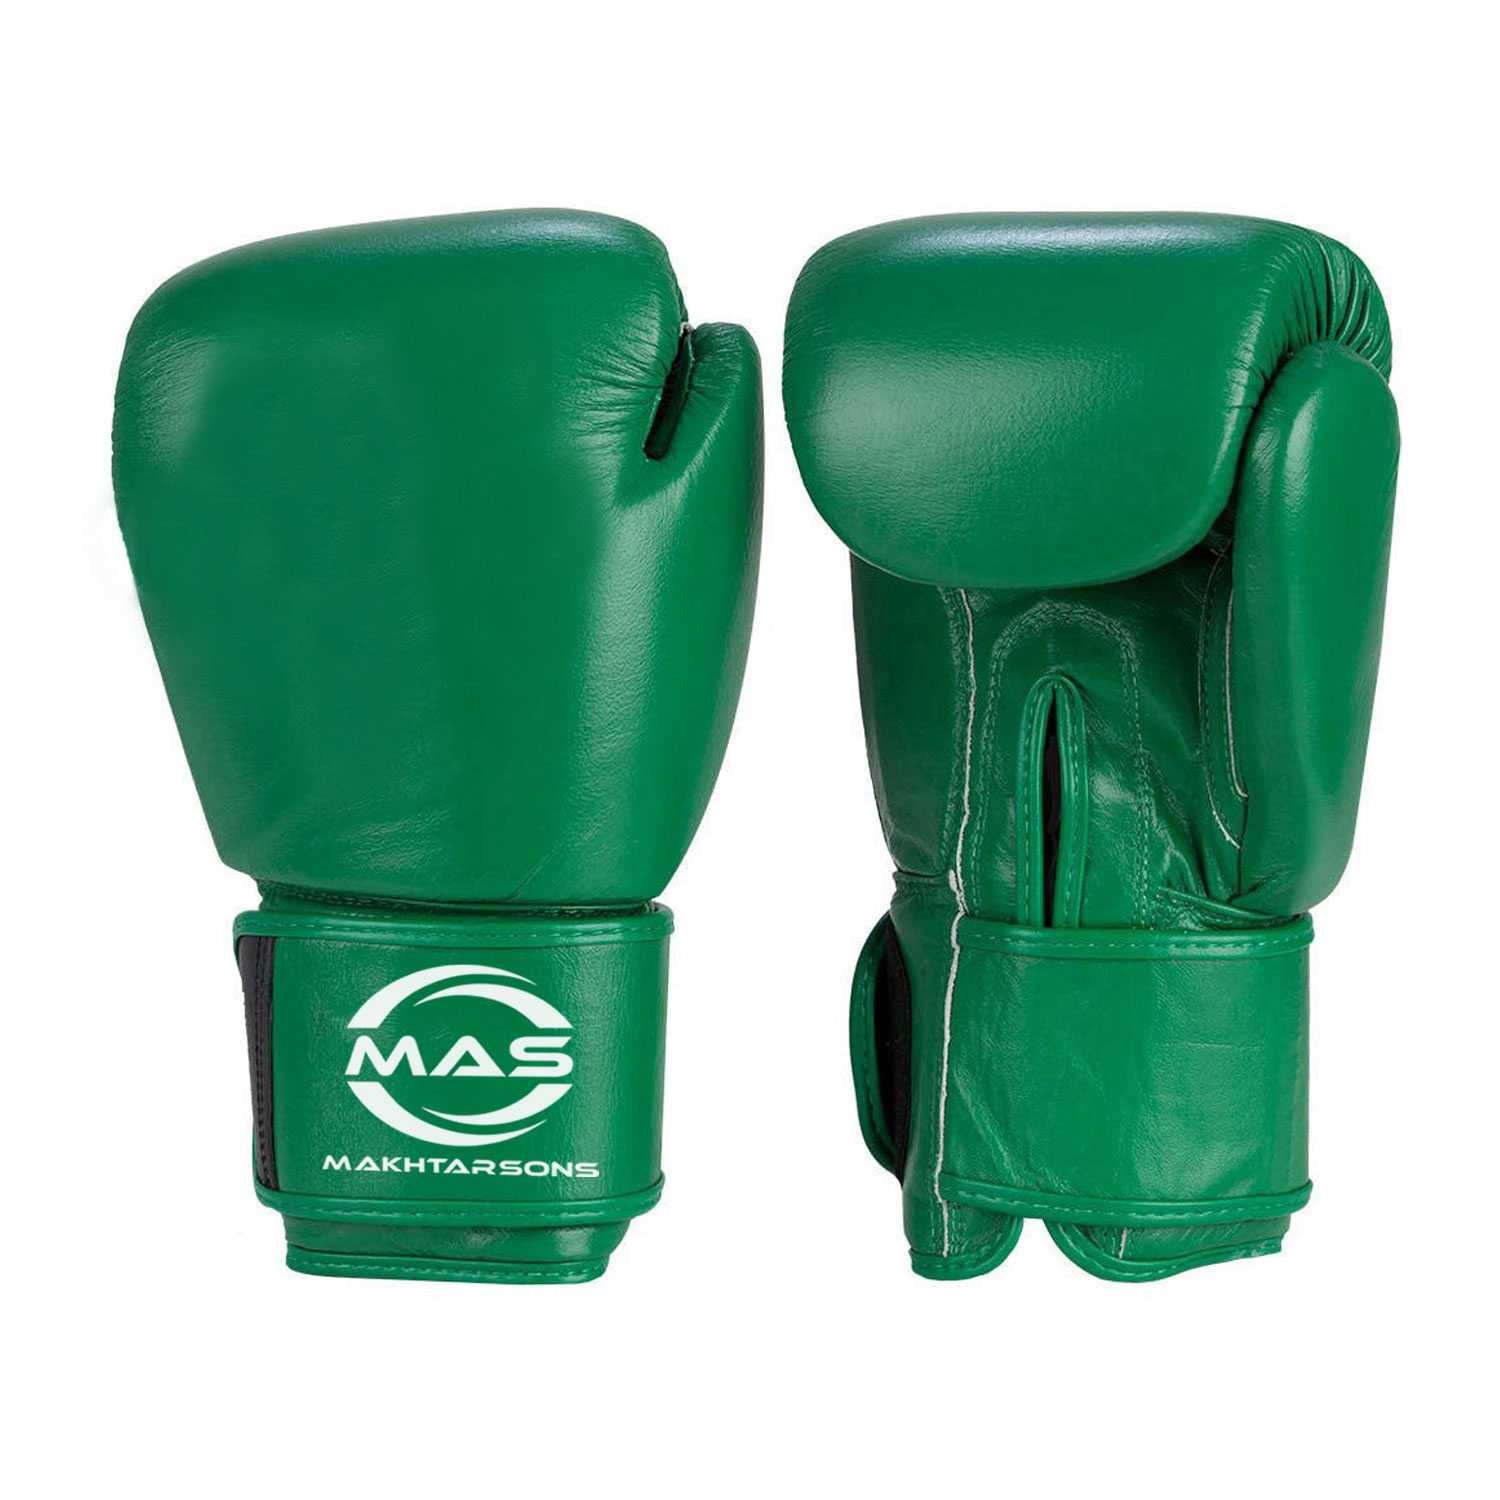 PROFESSIONAL BOXING GLOVES | MAS 212